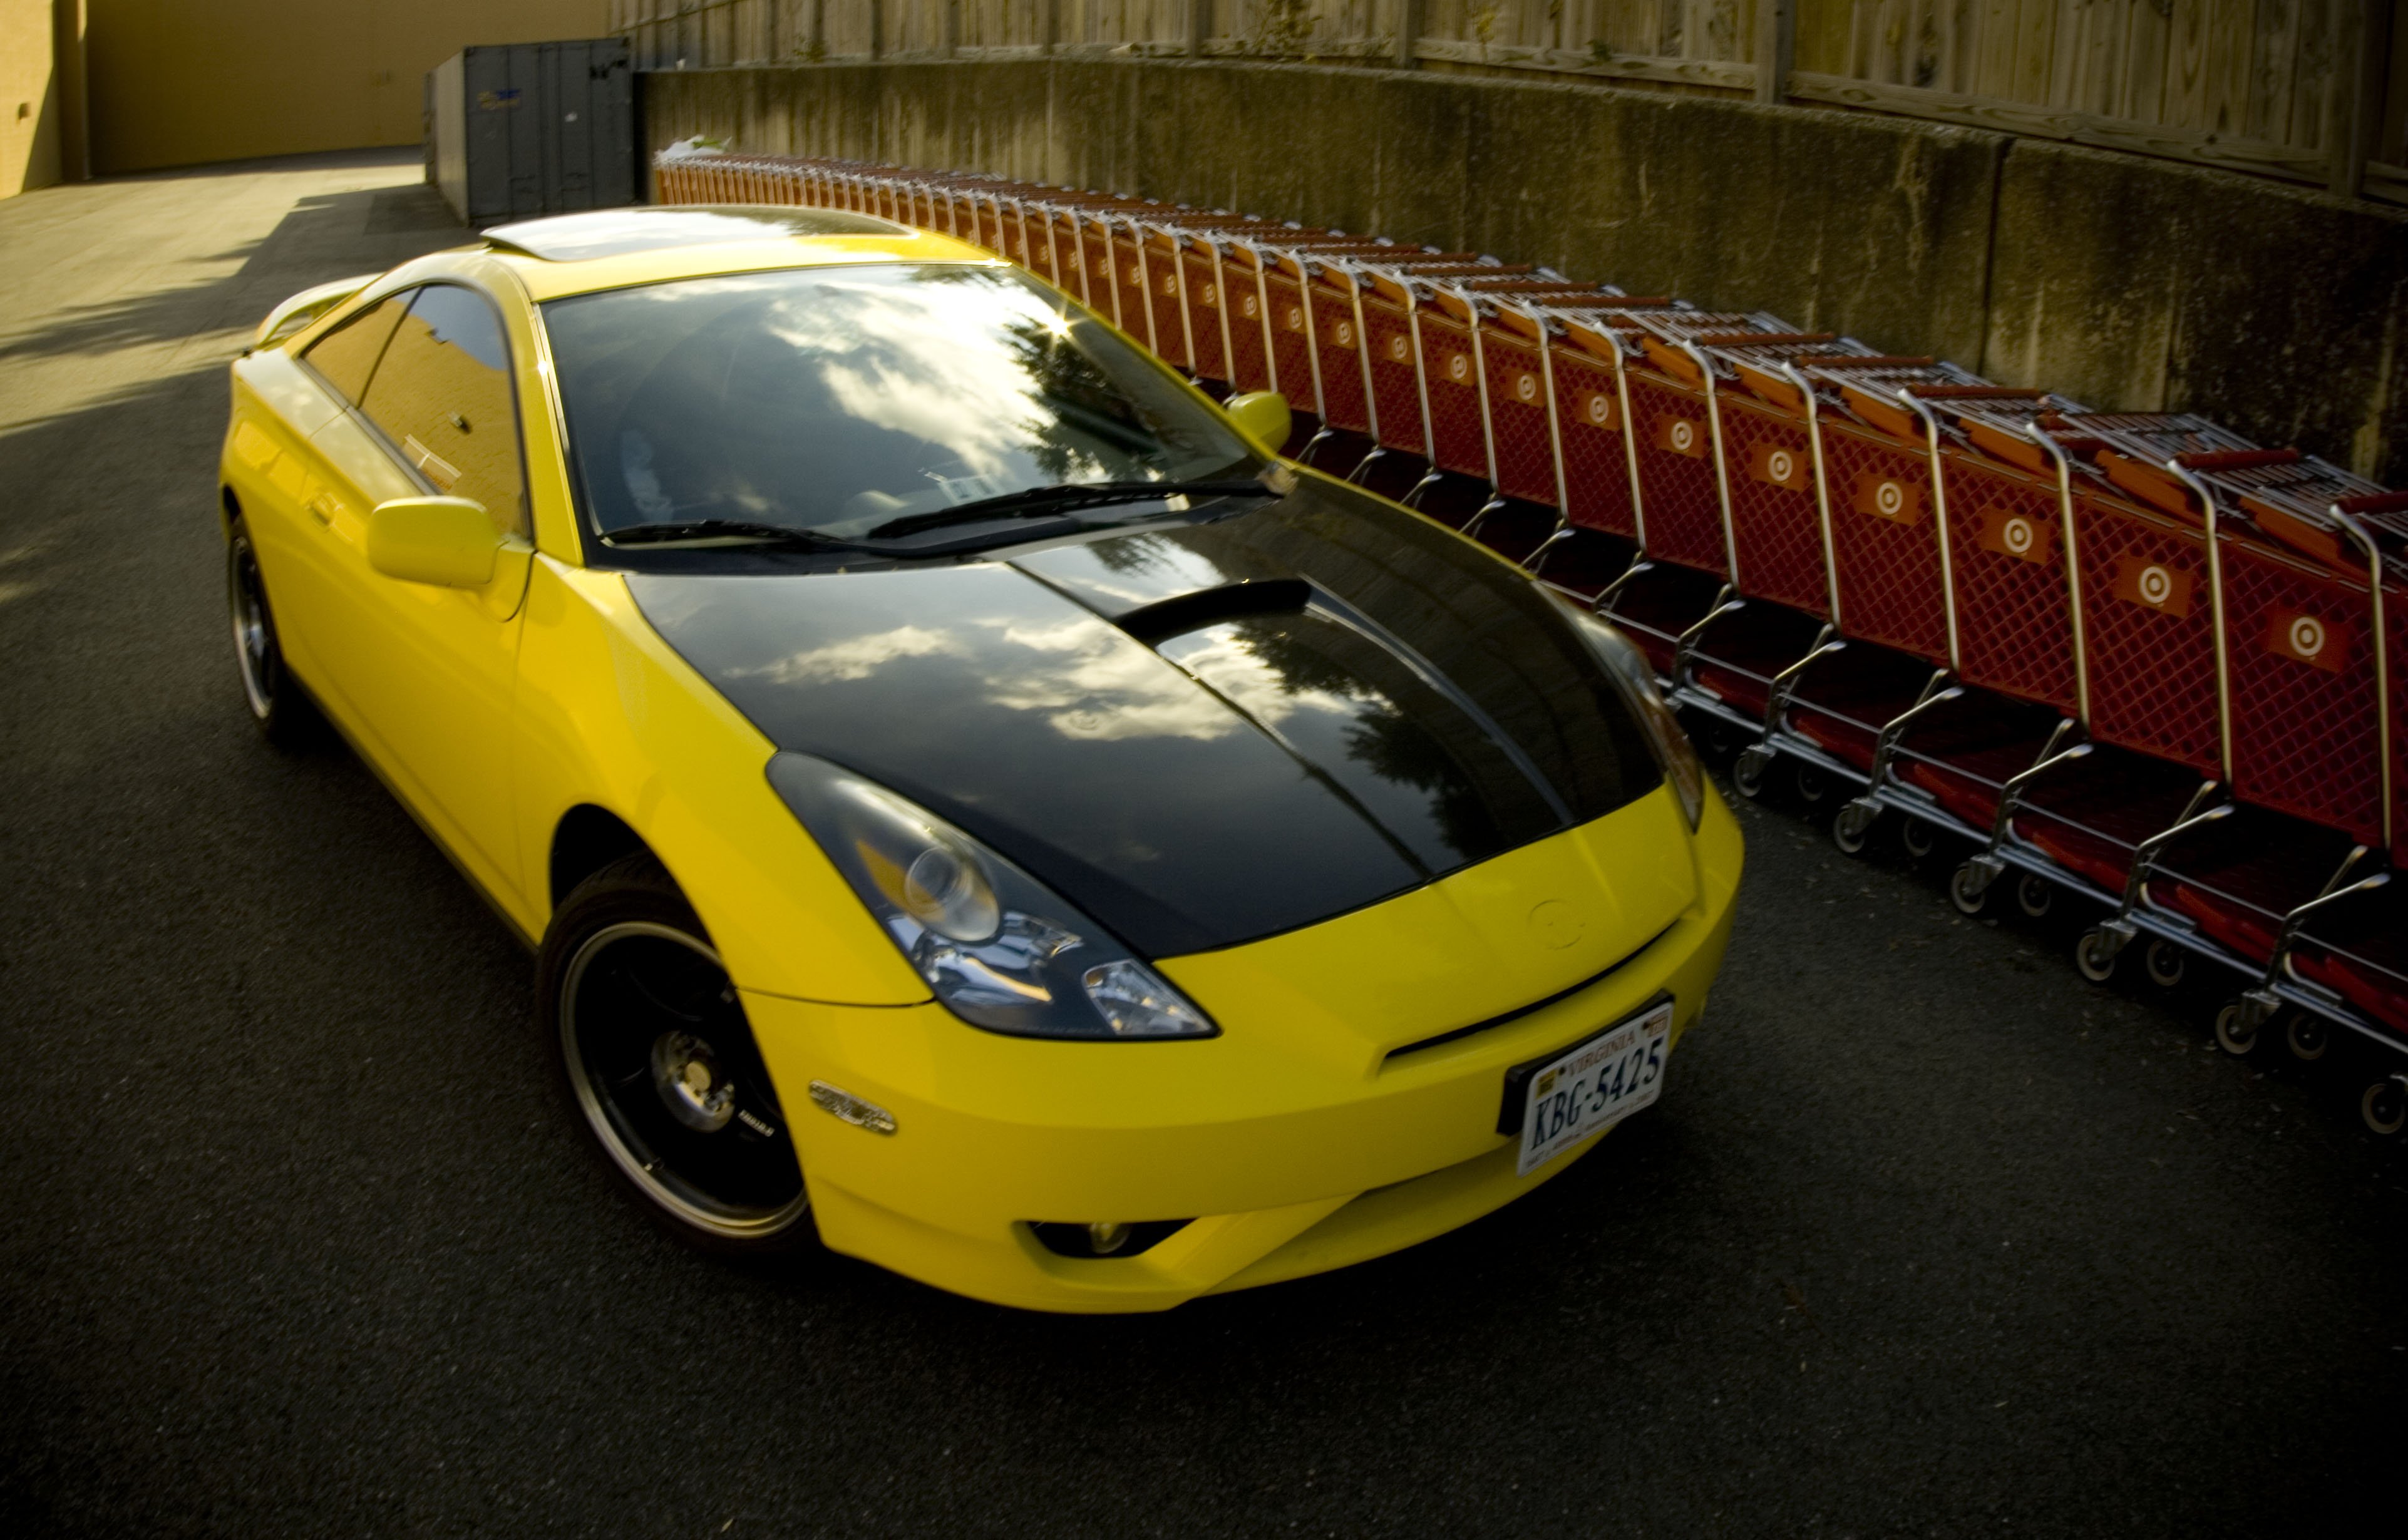 toyota, Celica, Cars, Coupe, Japan Wallpaper